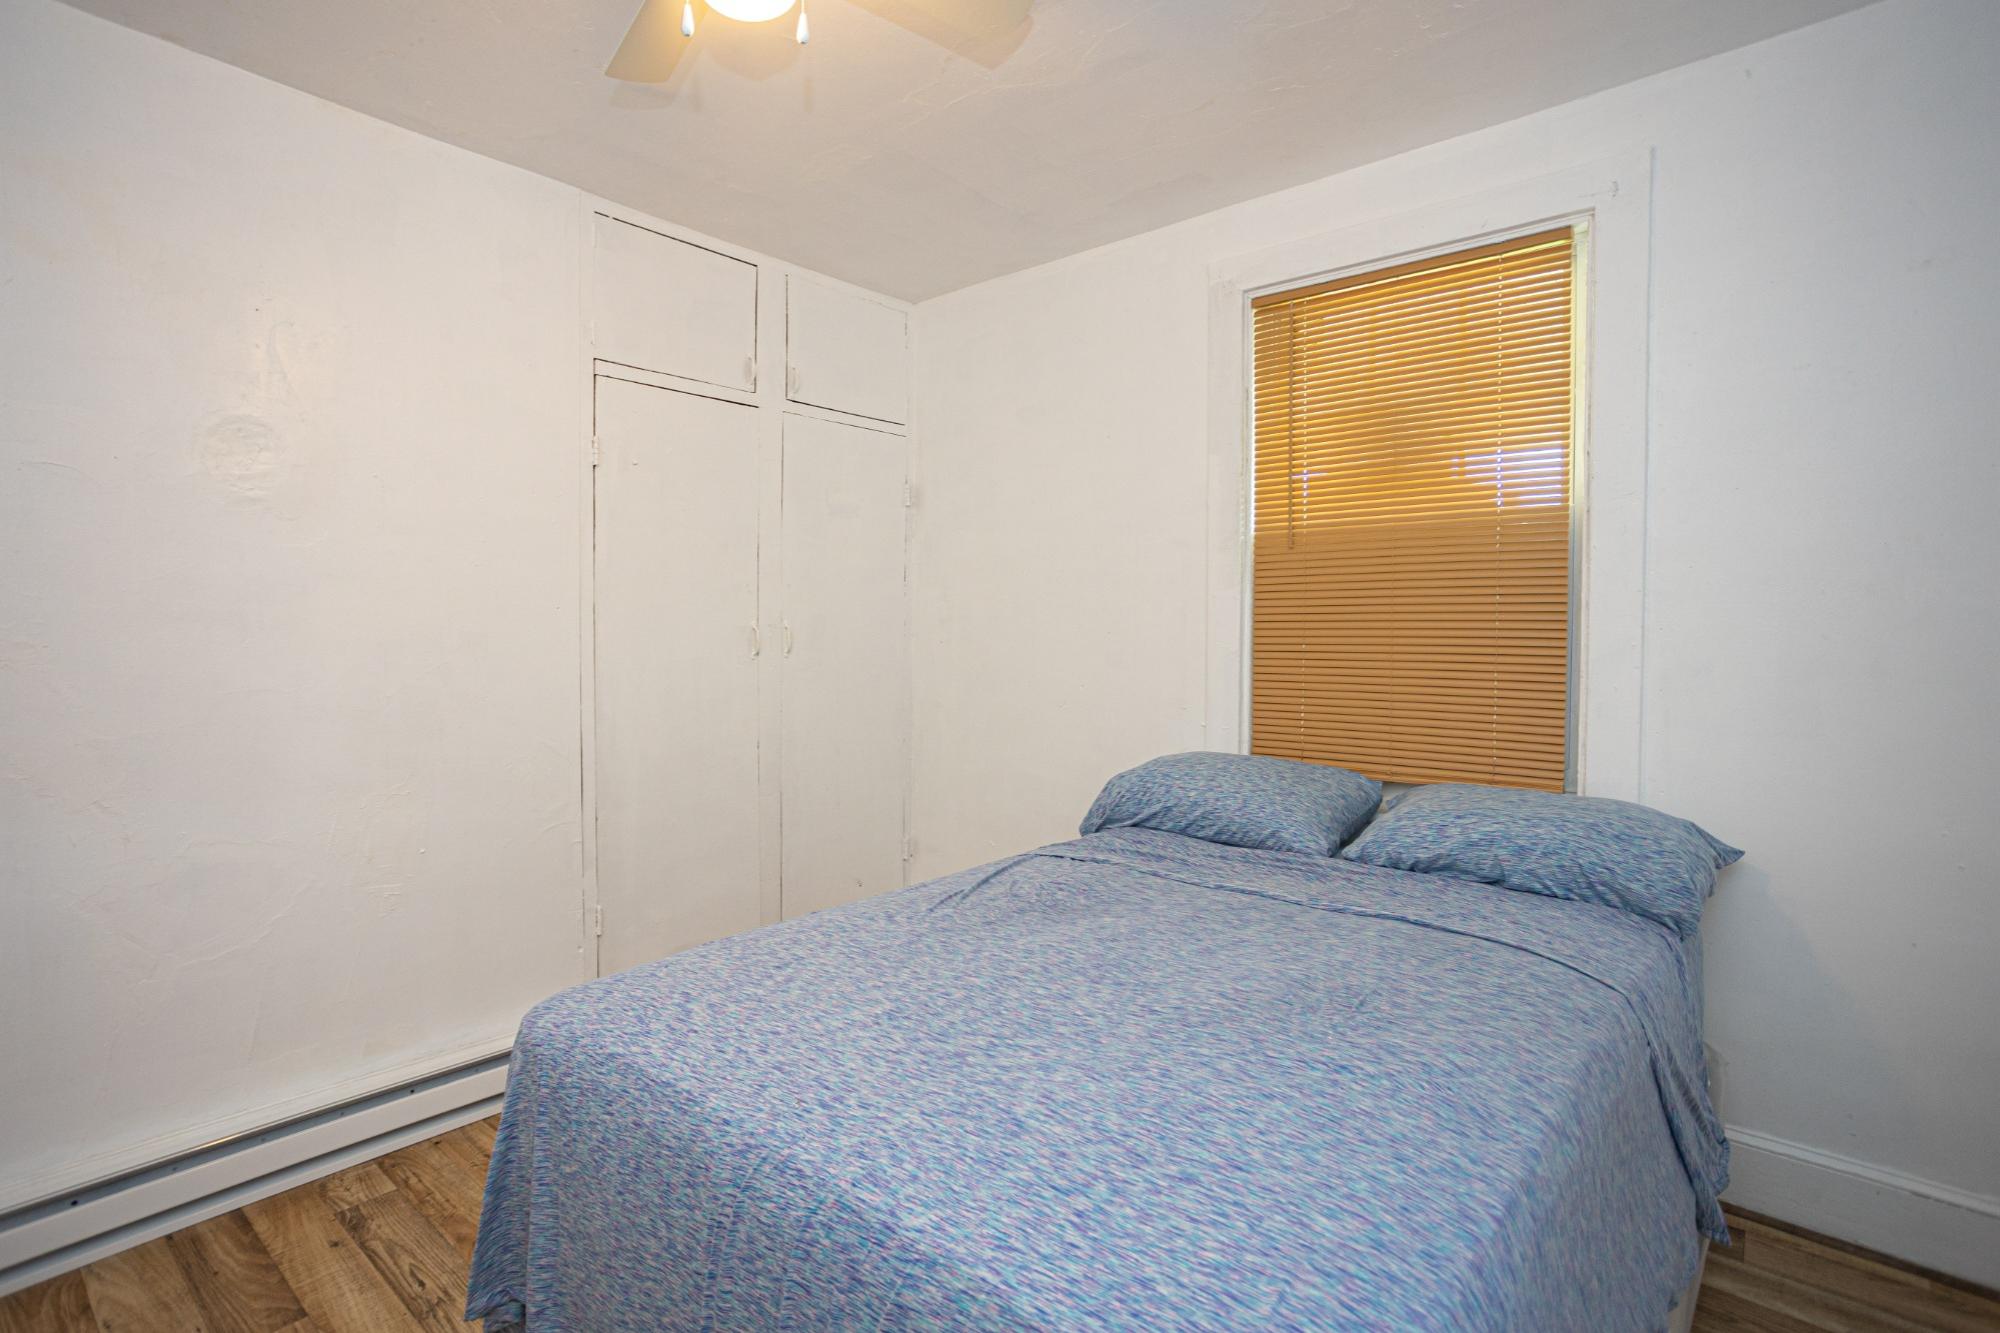 Richmond, VA Affordable Rooms for Rent from $131